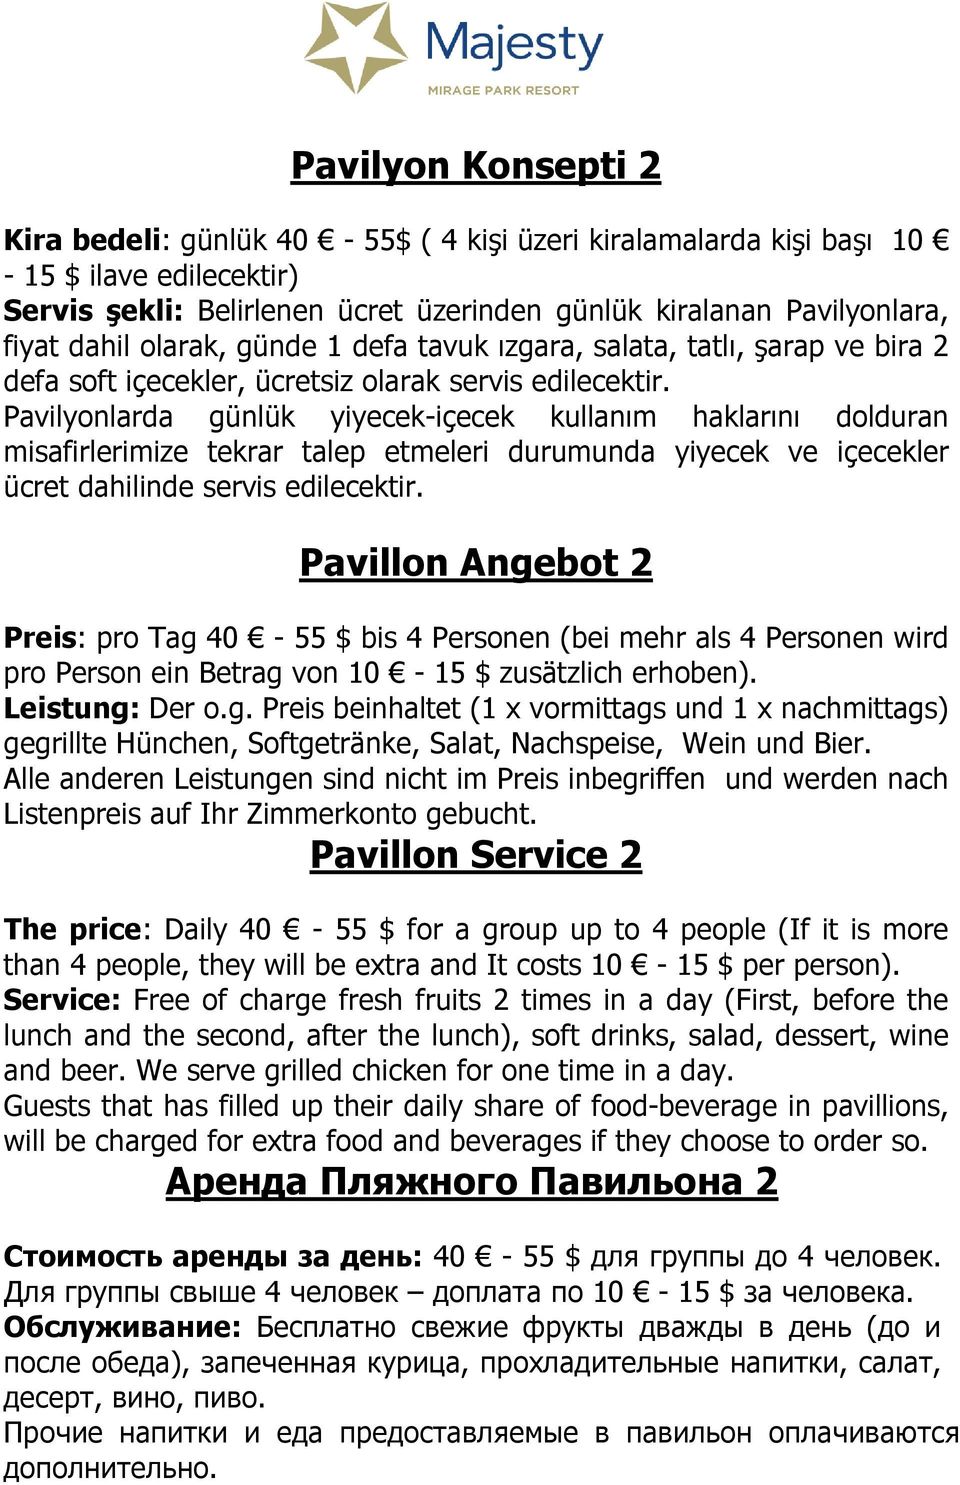 Pavillon Service 2 The price: Daily 40-55 $ for a group up to 4 people (If it is more than 4 people, they will be extra and It costs 10-15 $ per person).